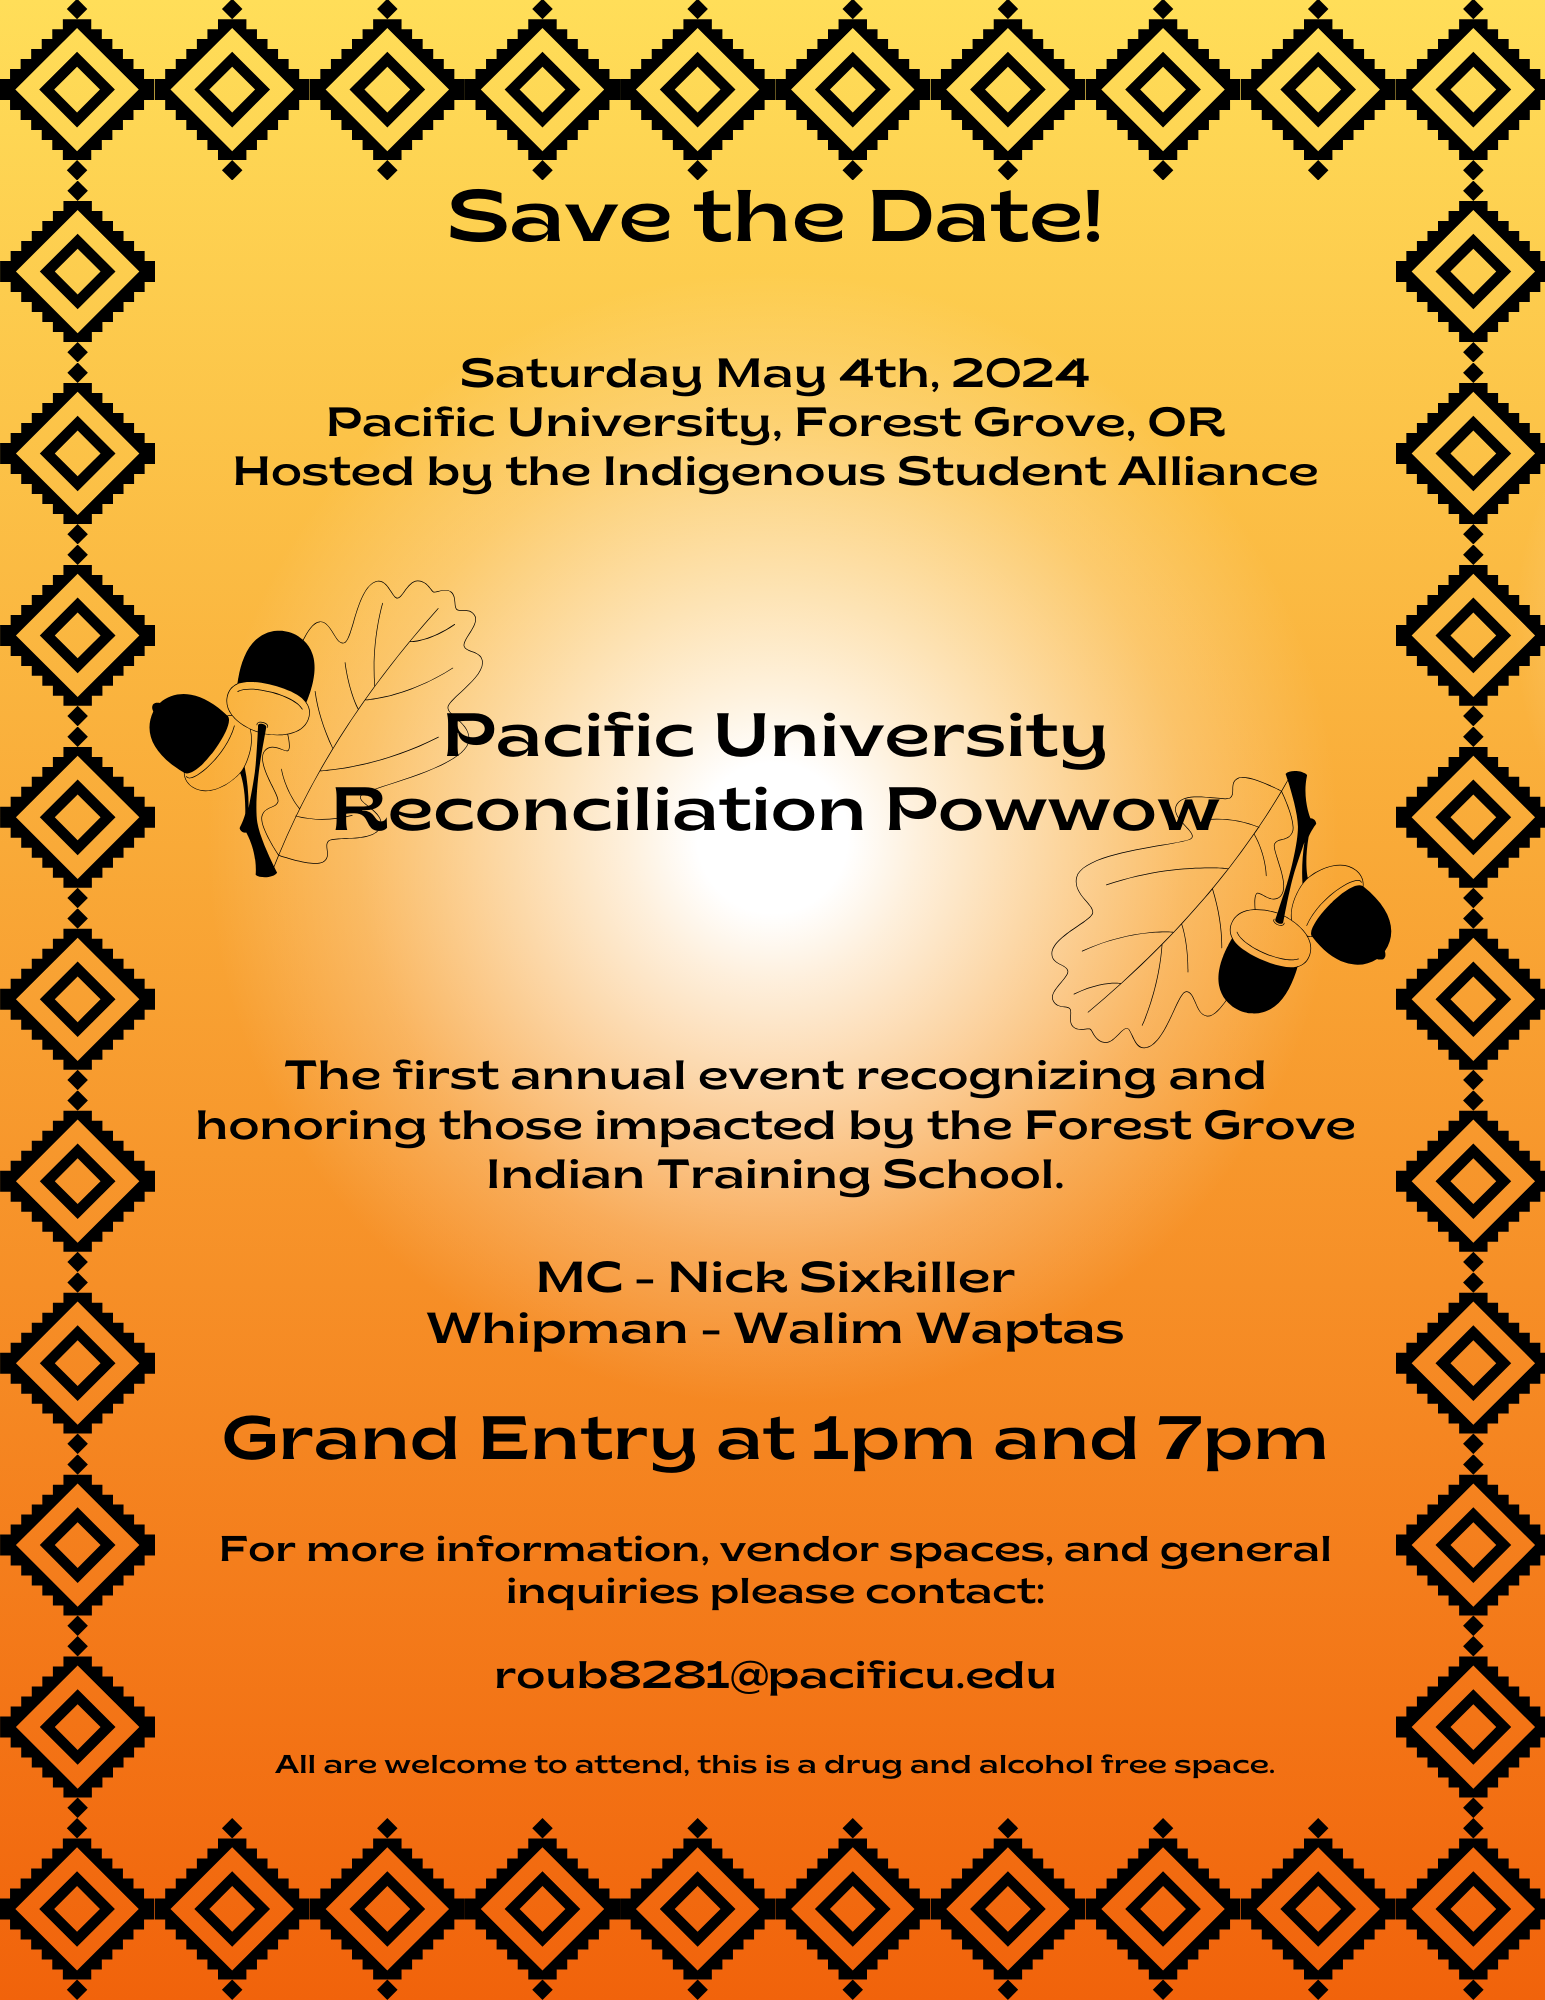 Save the date for ISA's first annual reconciliation powwow on May 4, 2024.